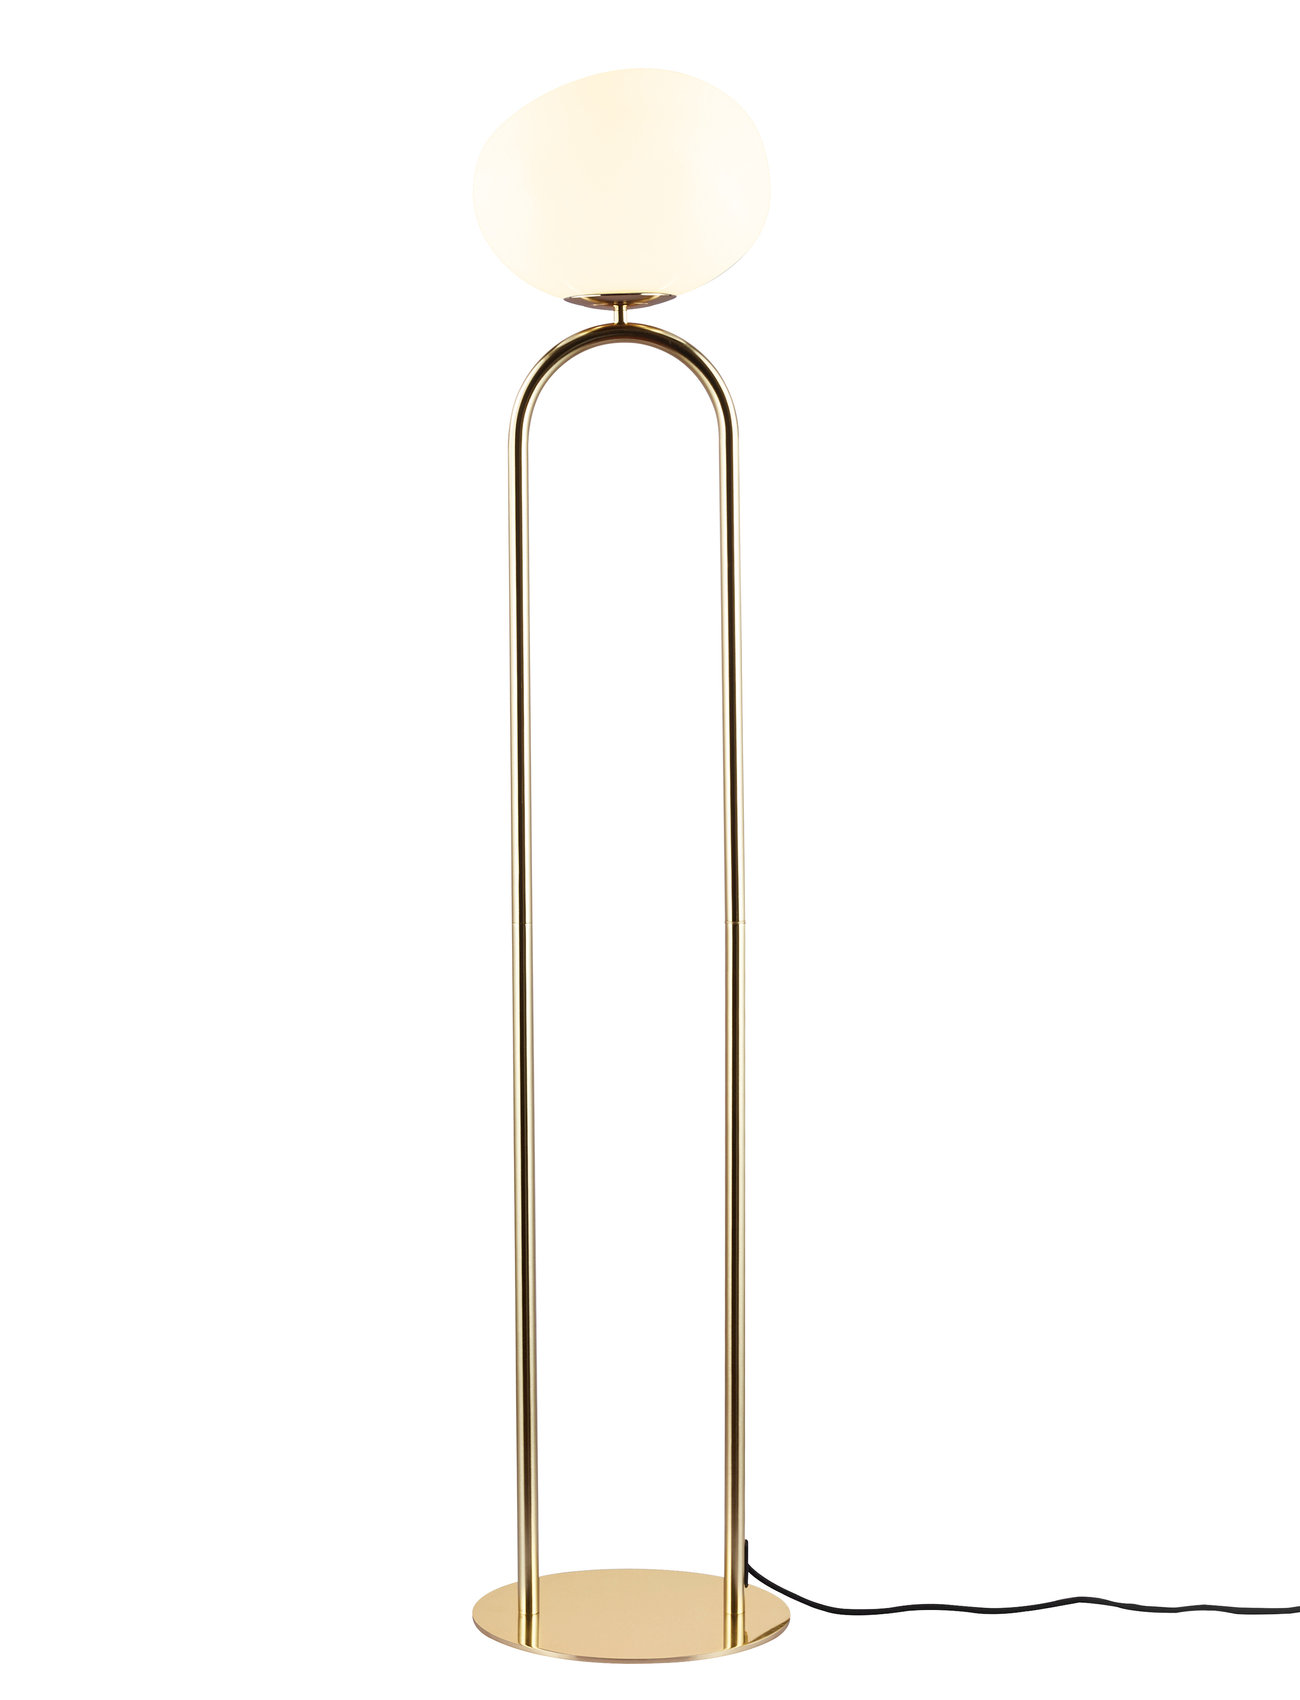 Shapes | Gulvlampe Home Lighting Lamps Floor Lamps Gold Design For The People